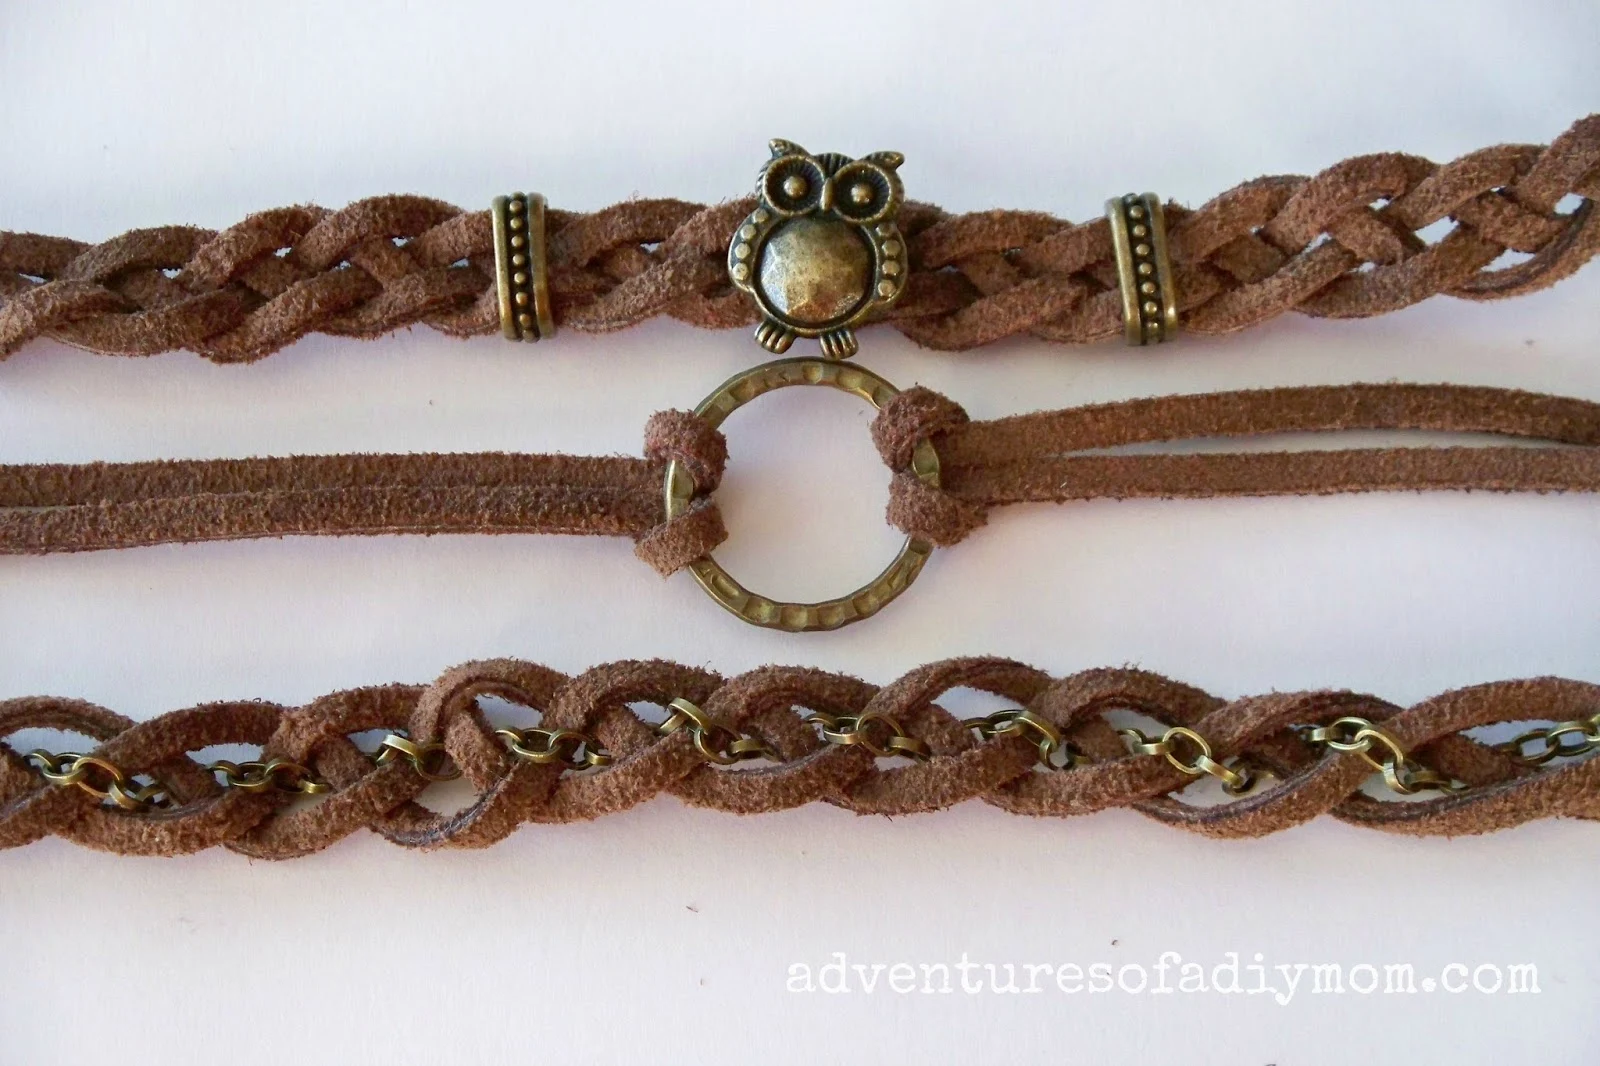 How to Make Braided Leather Stacked Bracelets